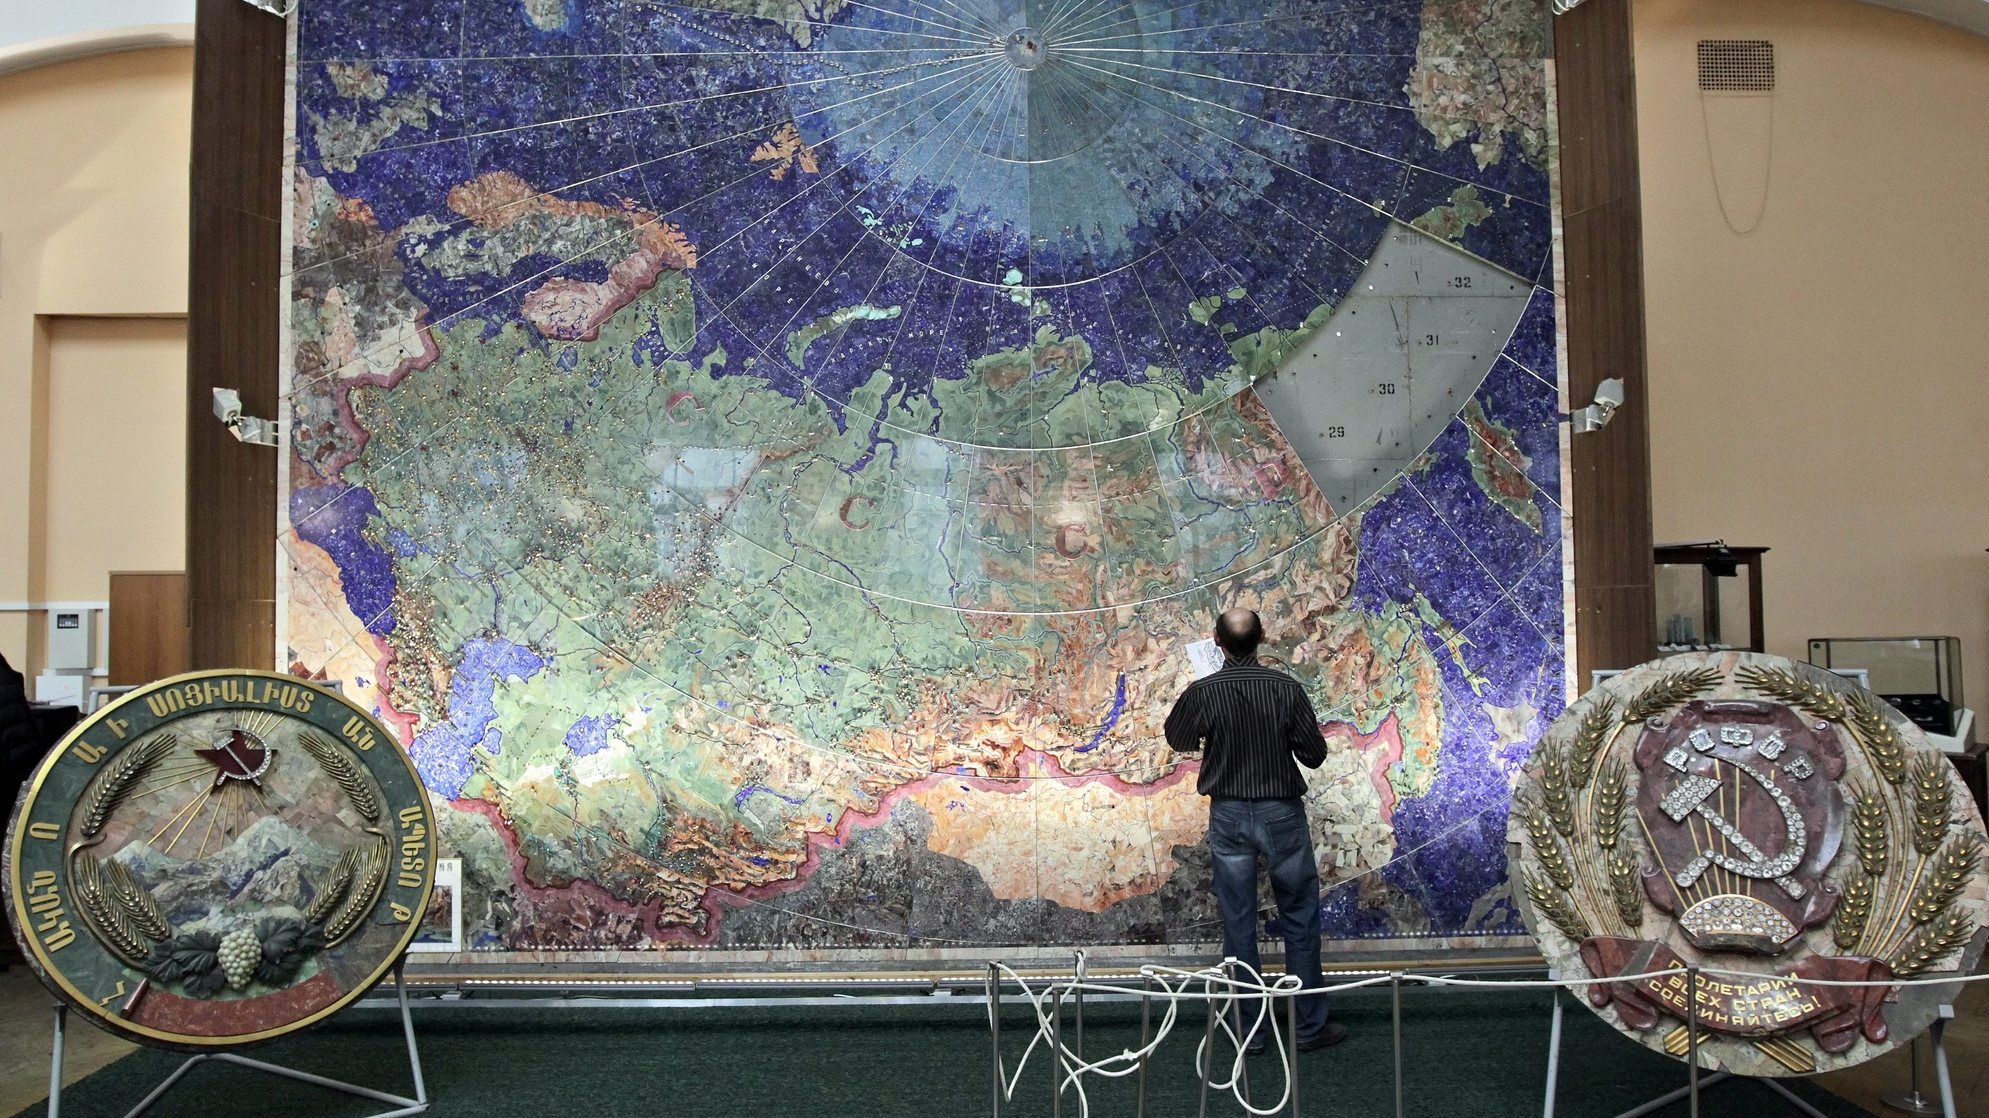 epa02980271 Staff works in a mosaic map of the USSR at the Russian Geological Research Institute (VSEGEI) in St.Petersburg, Russia, 25 October 2011. The mosaic currently under restoration is made of a set of 45,000 plates jasper, lapis lazuli, amazonite and rhodonite, originally pasted on textolite basis. Cities and towns are marked with gilded silver stars with inserts of artificial rubies. Line parallels, meridians, railroads, and all the place names are made of platinized silver.  EPA/ANATOLY MALTSEV